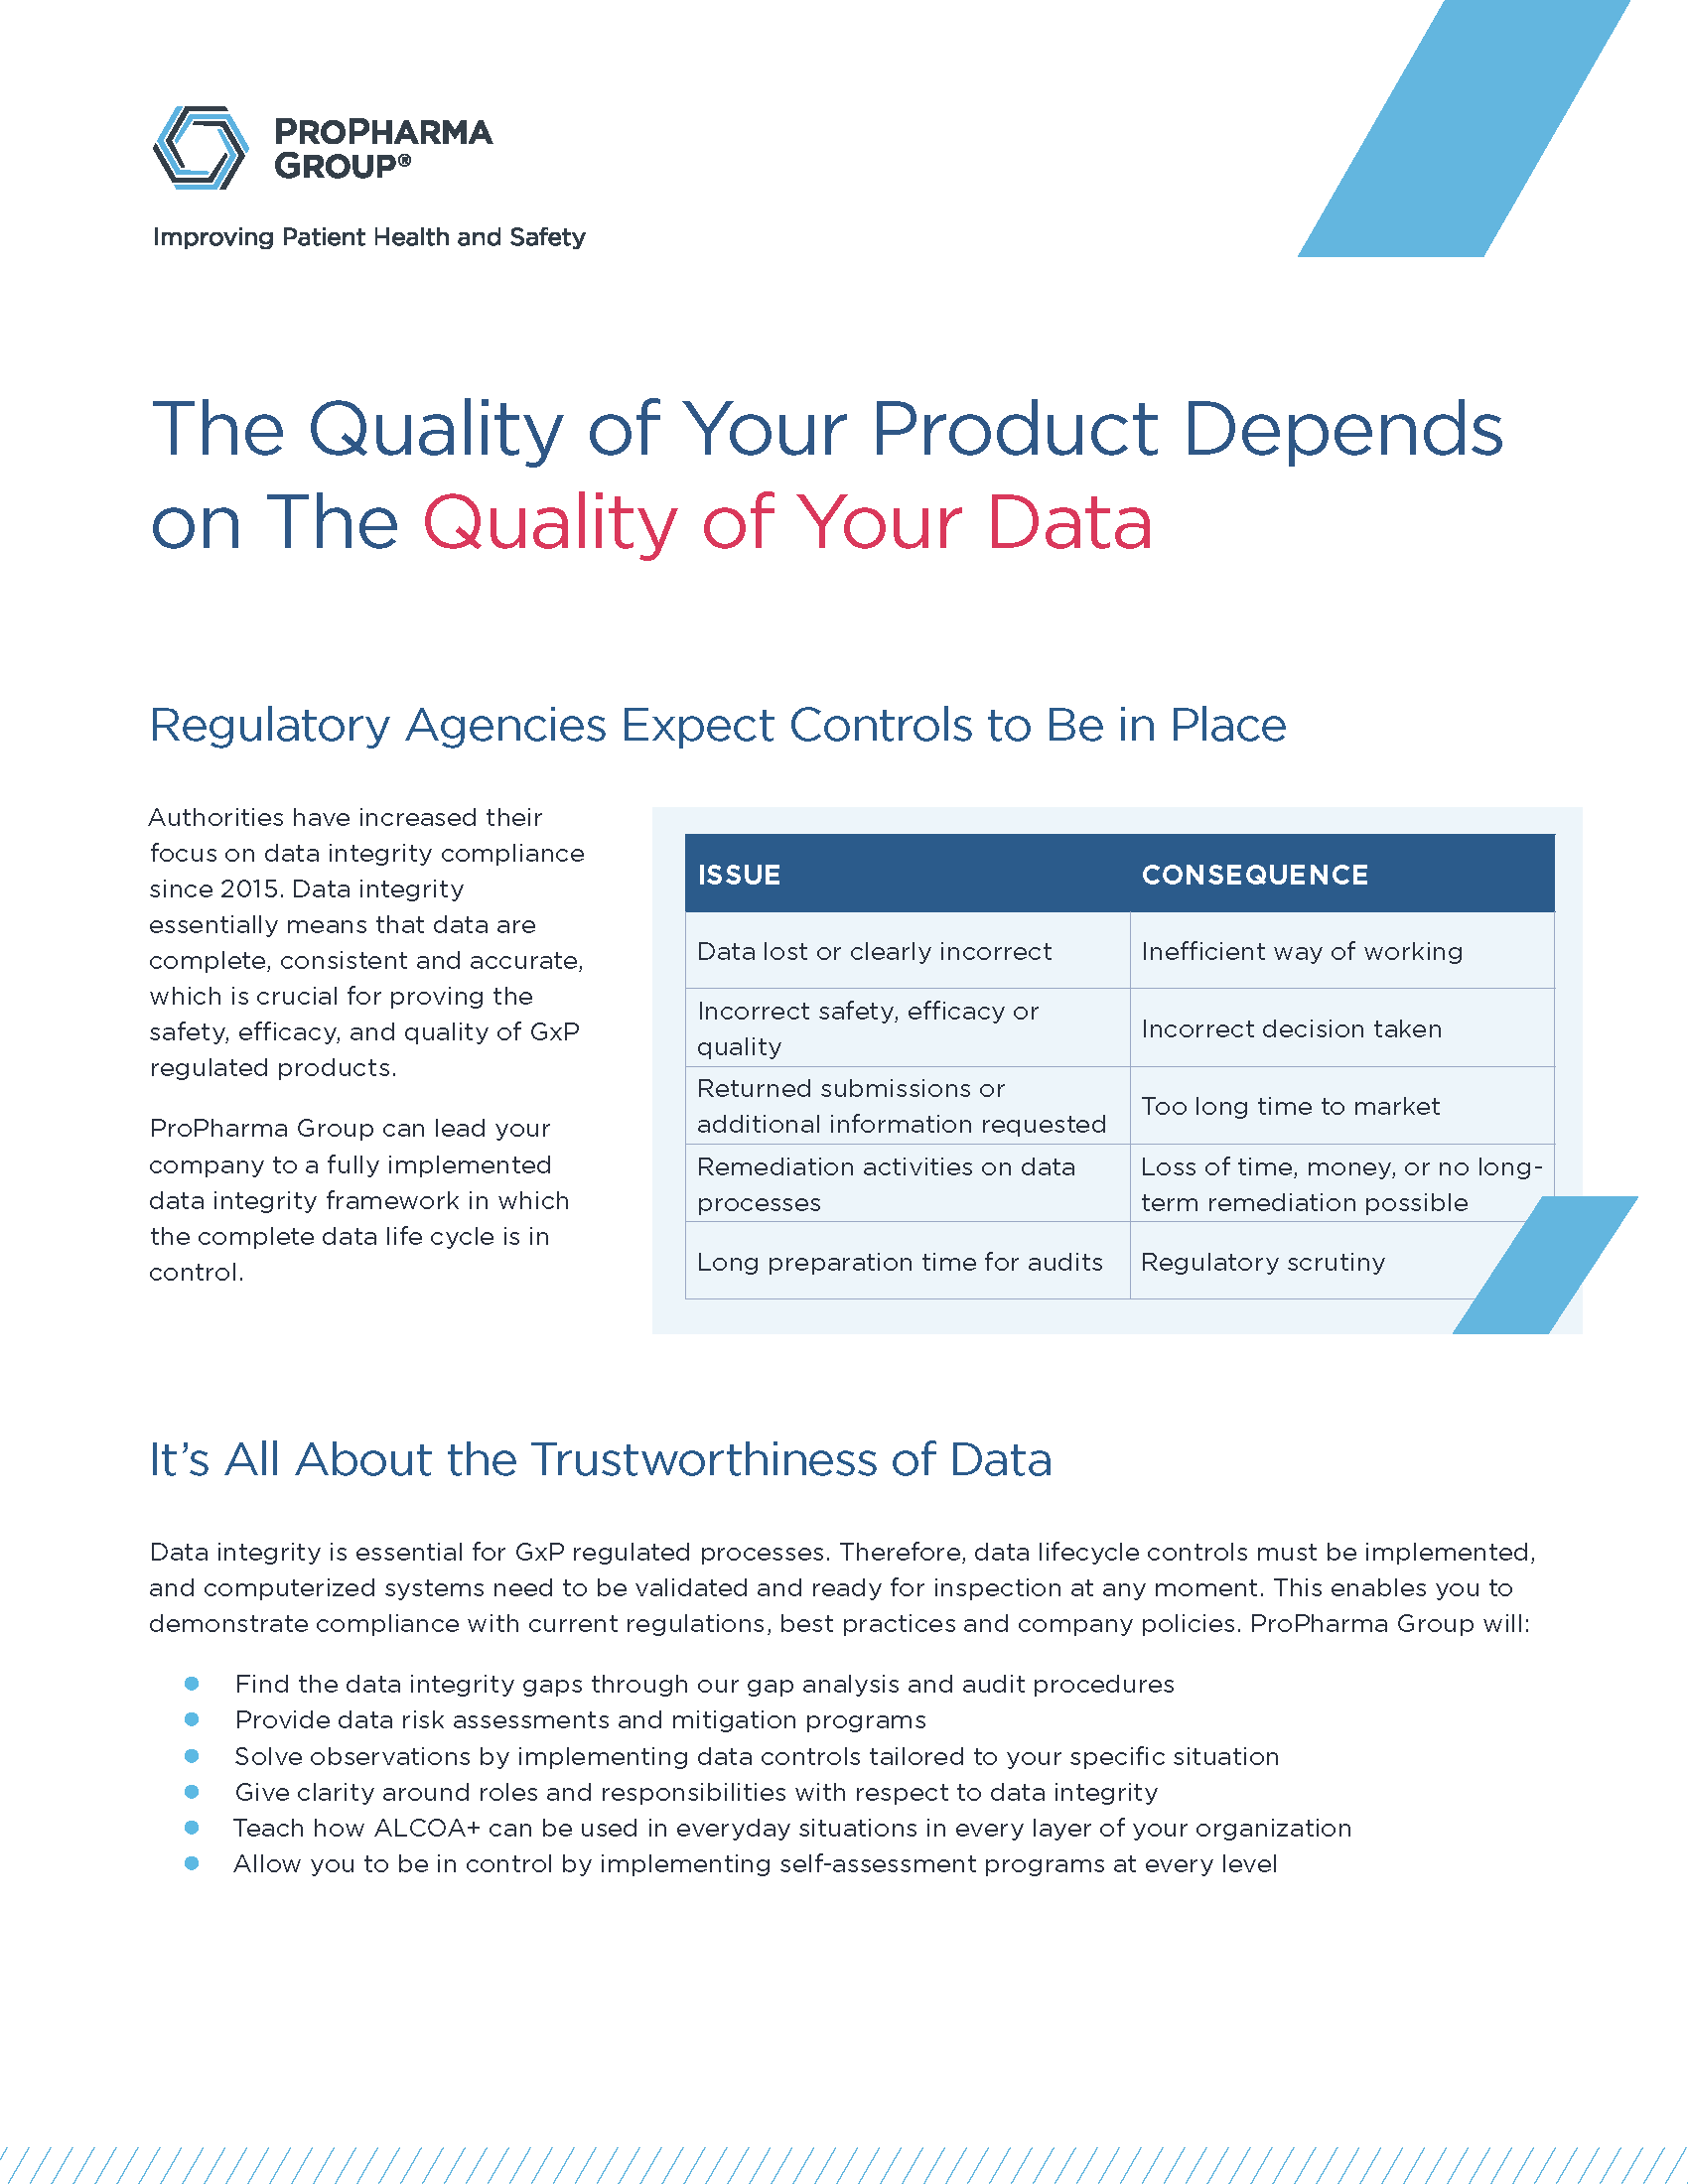 Data Integrity: The Quality of Your Product Depends on The Quality of Your Data Image